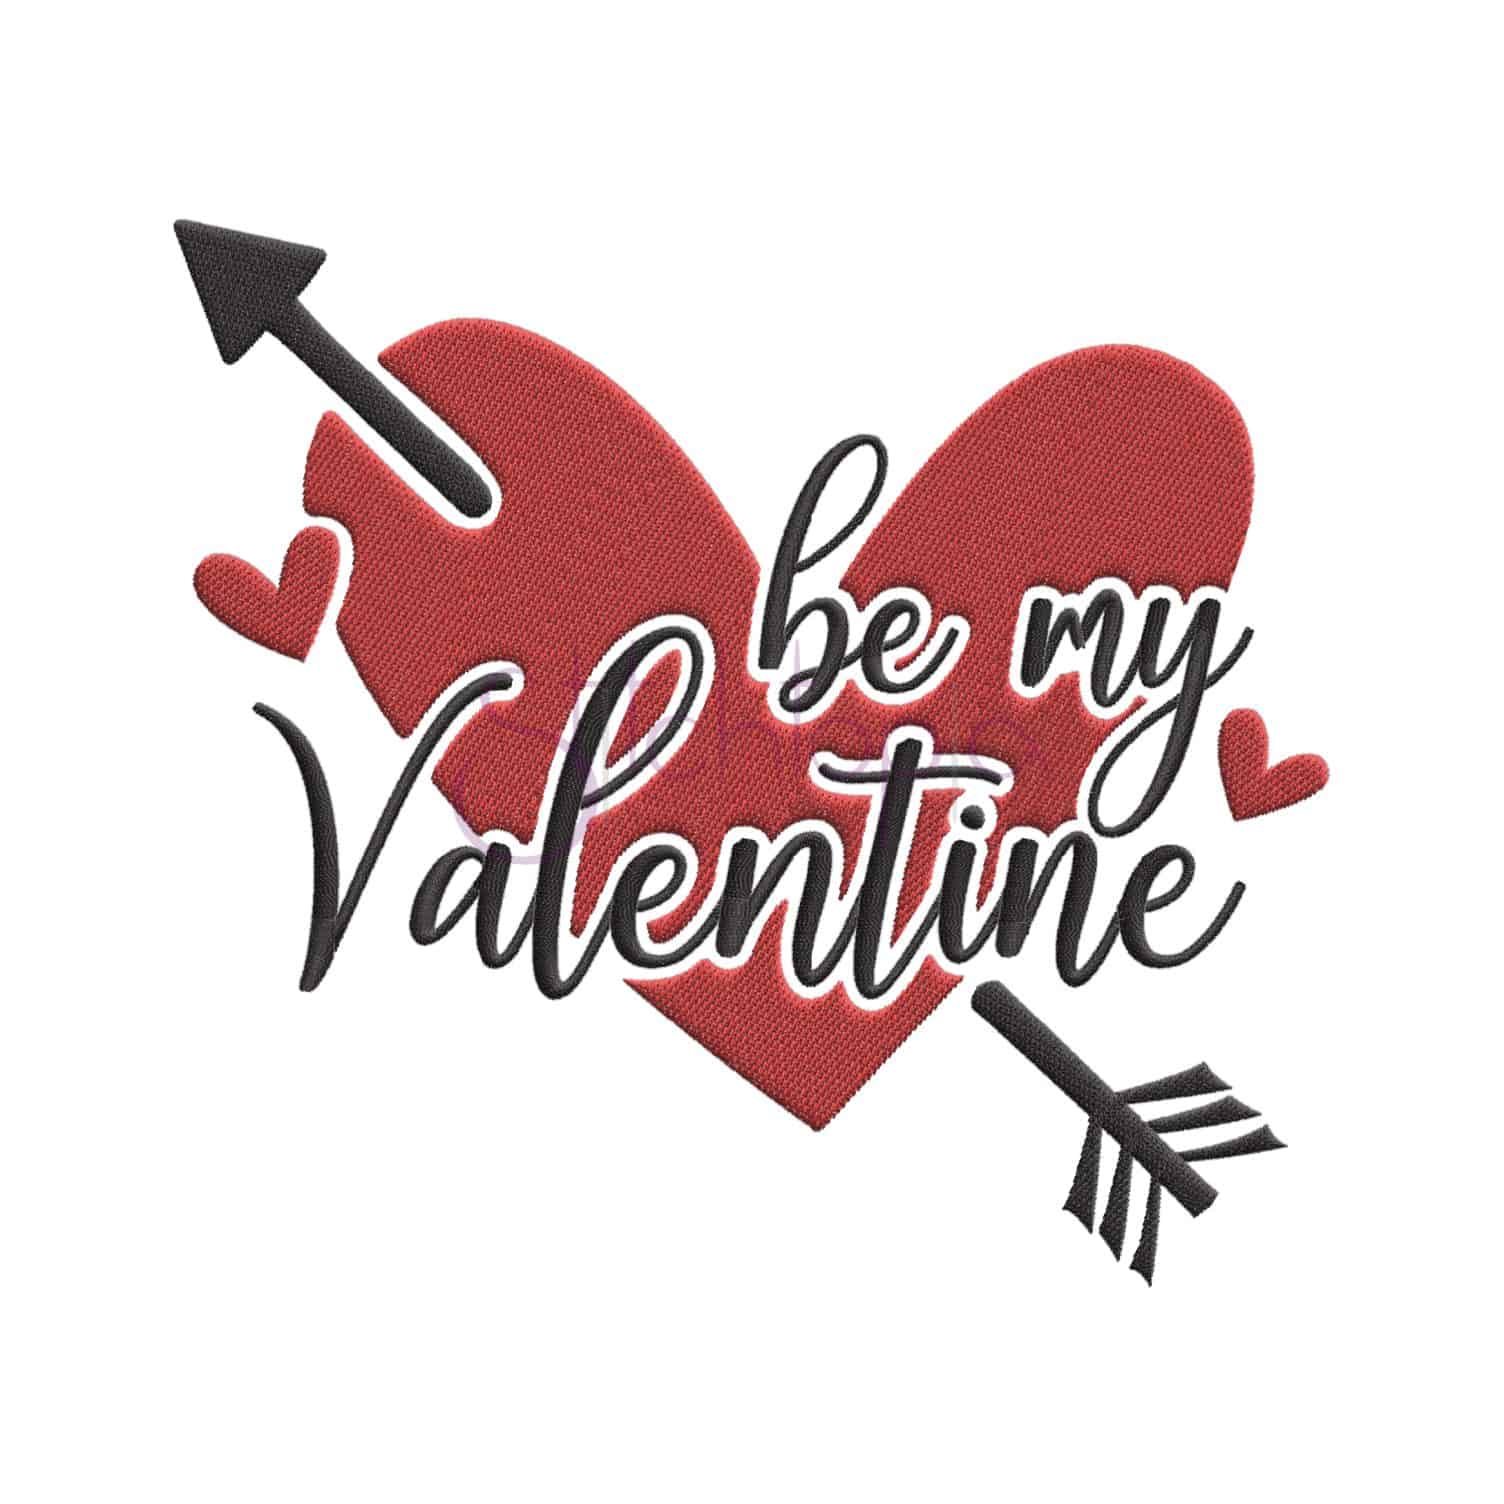 Be My Valentine Heart Embroidery Design Stitchtopia,Wood Fireplace Designs Pictures